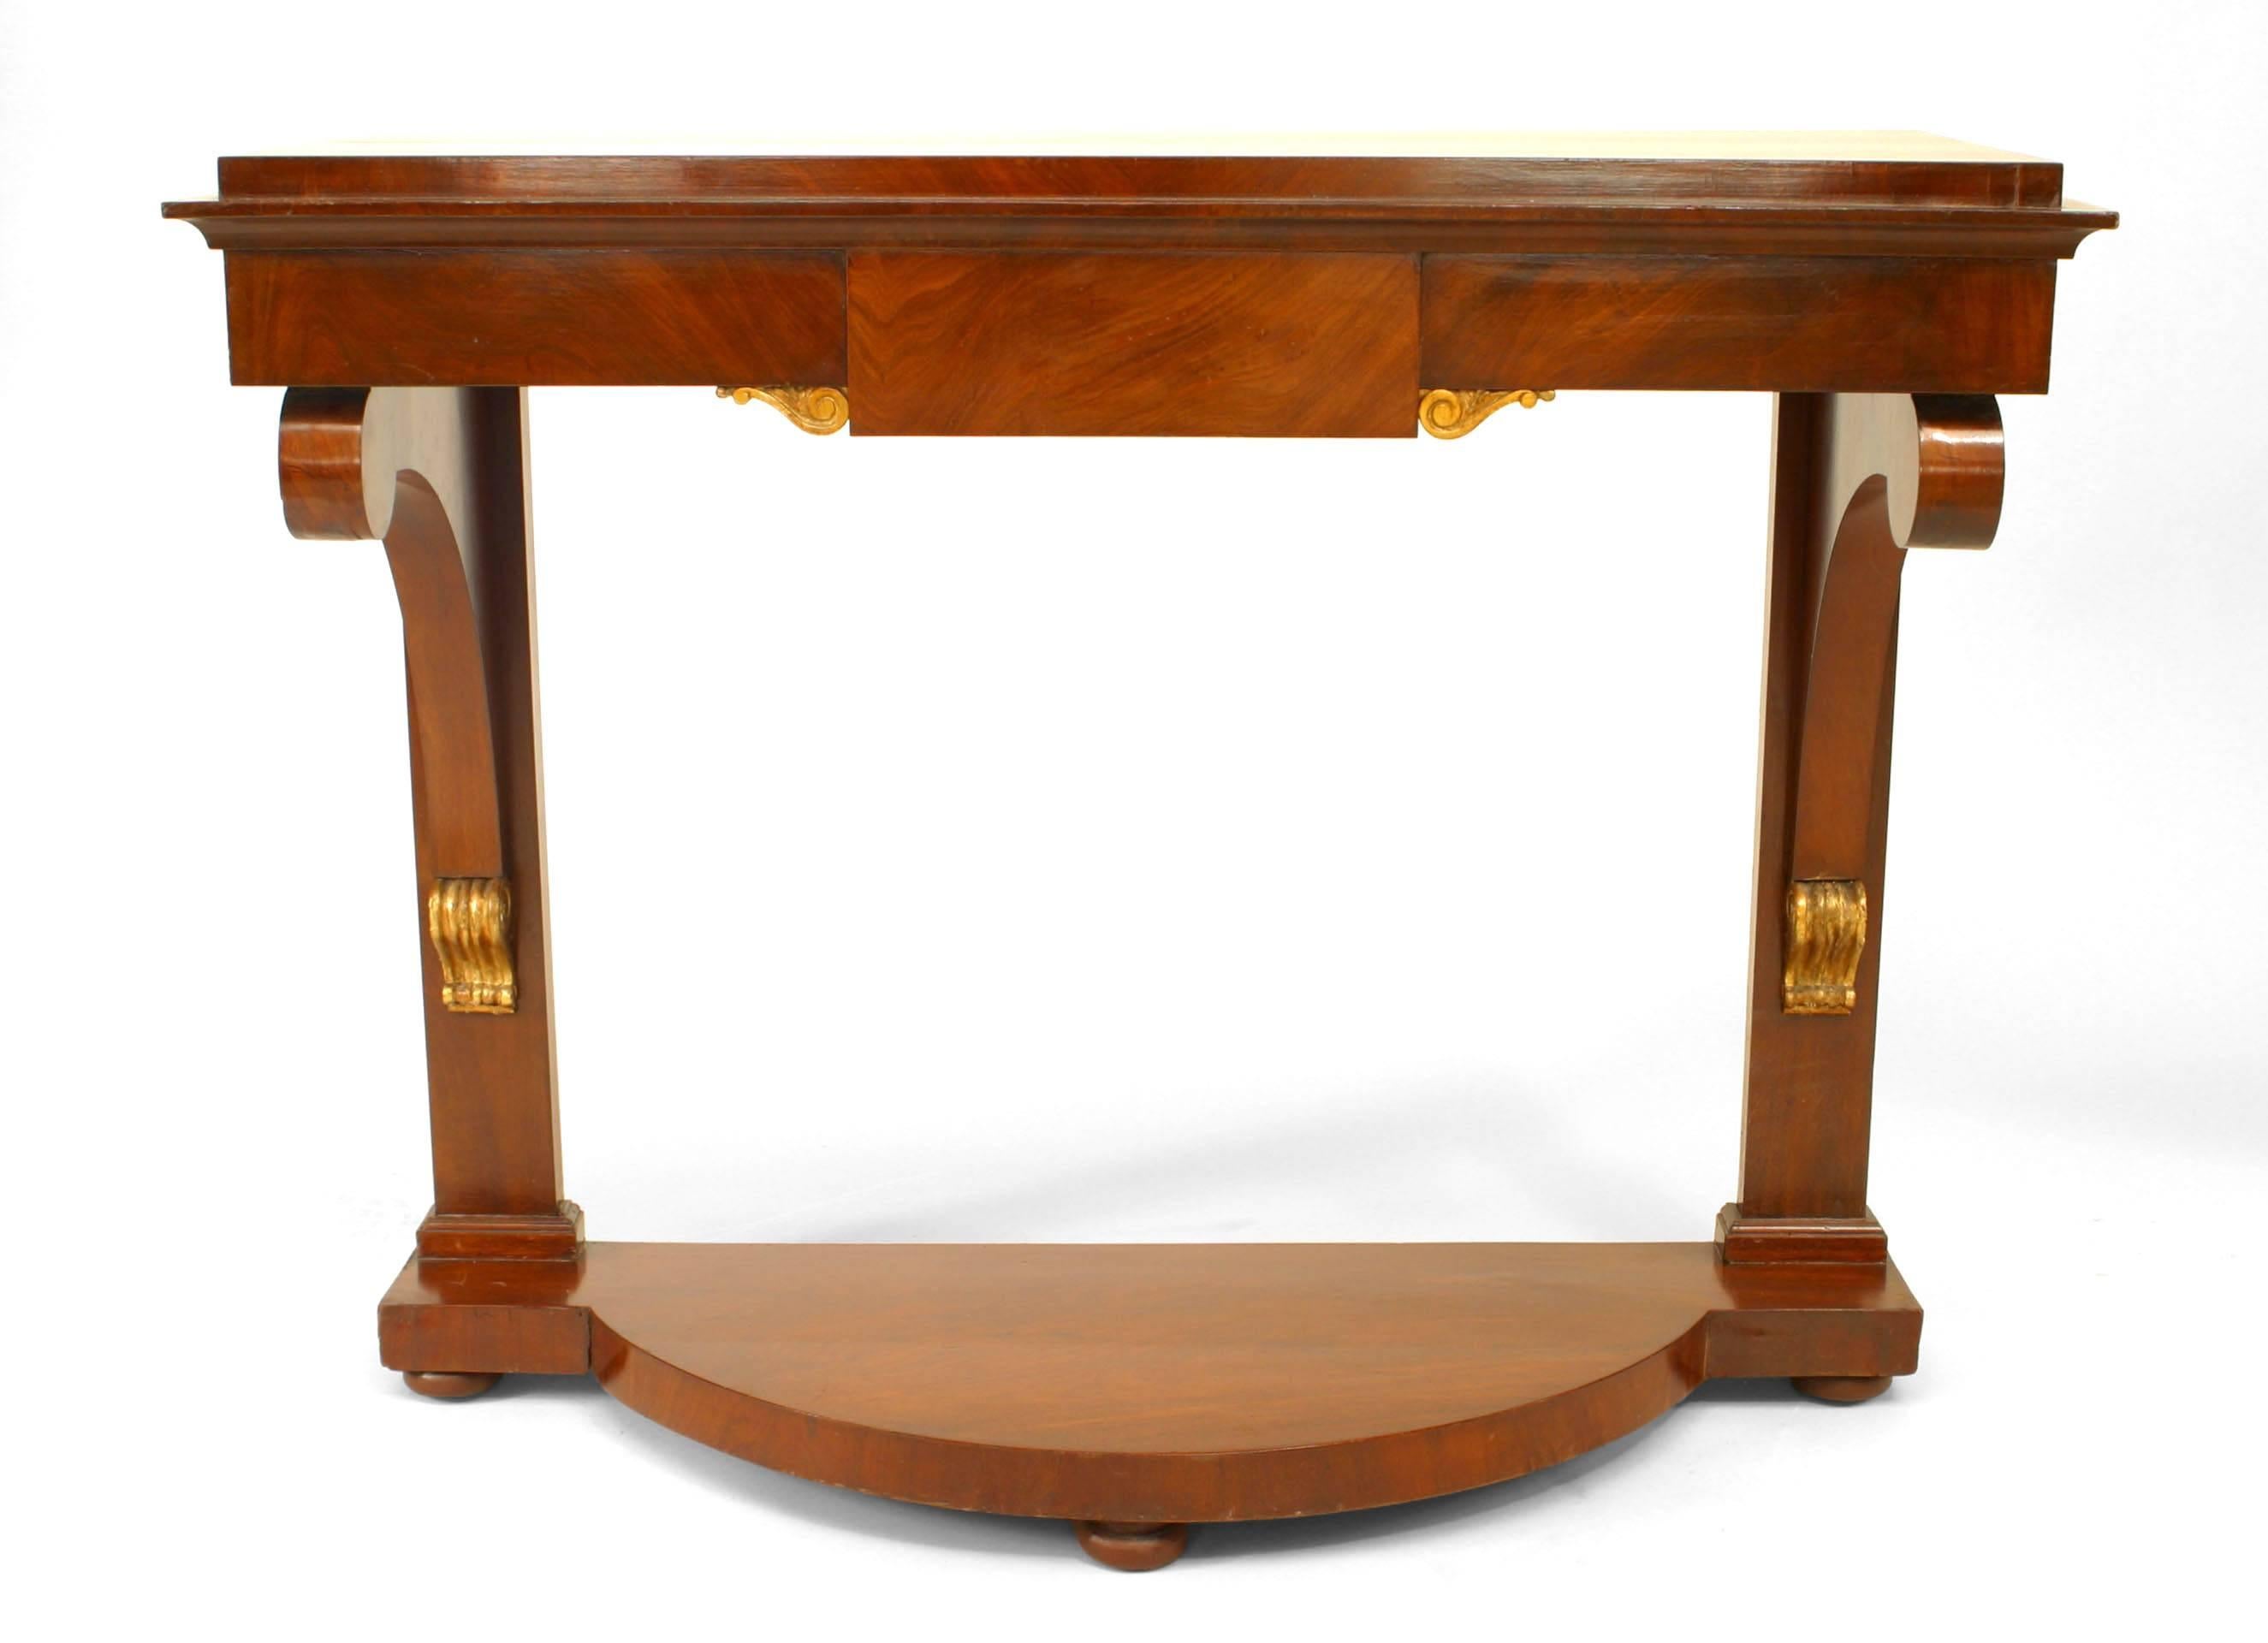 Continental German-style (1st Half of 19th Century) mahogany console table with scroll sided supported on a demilune form platform base.
